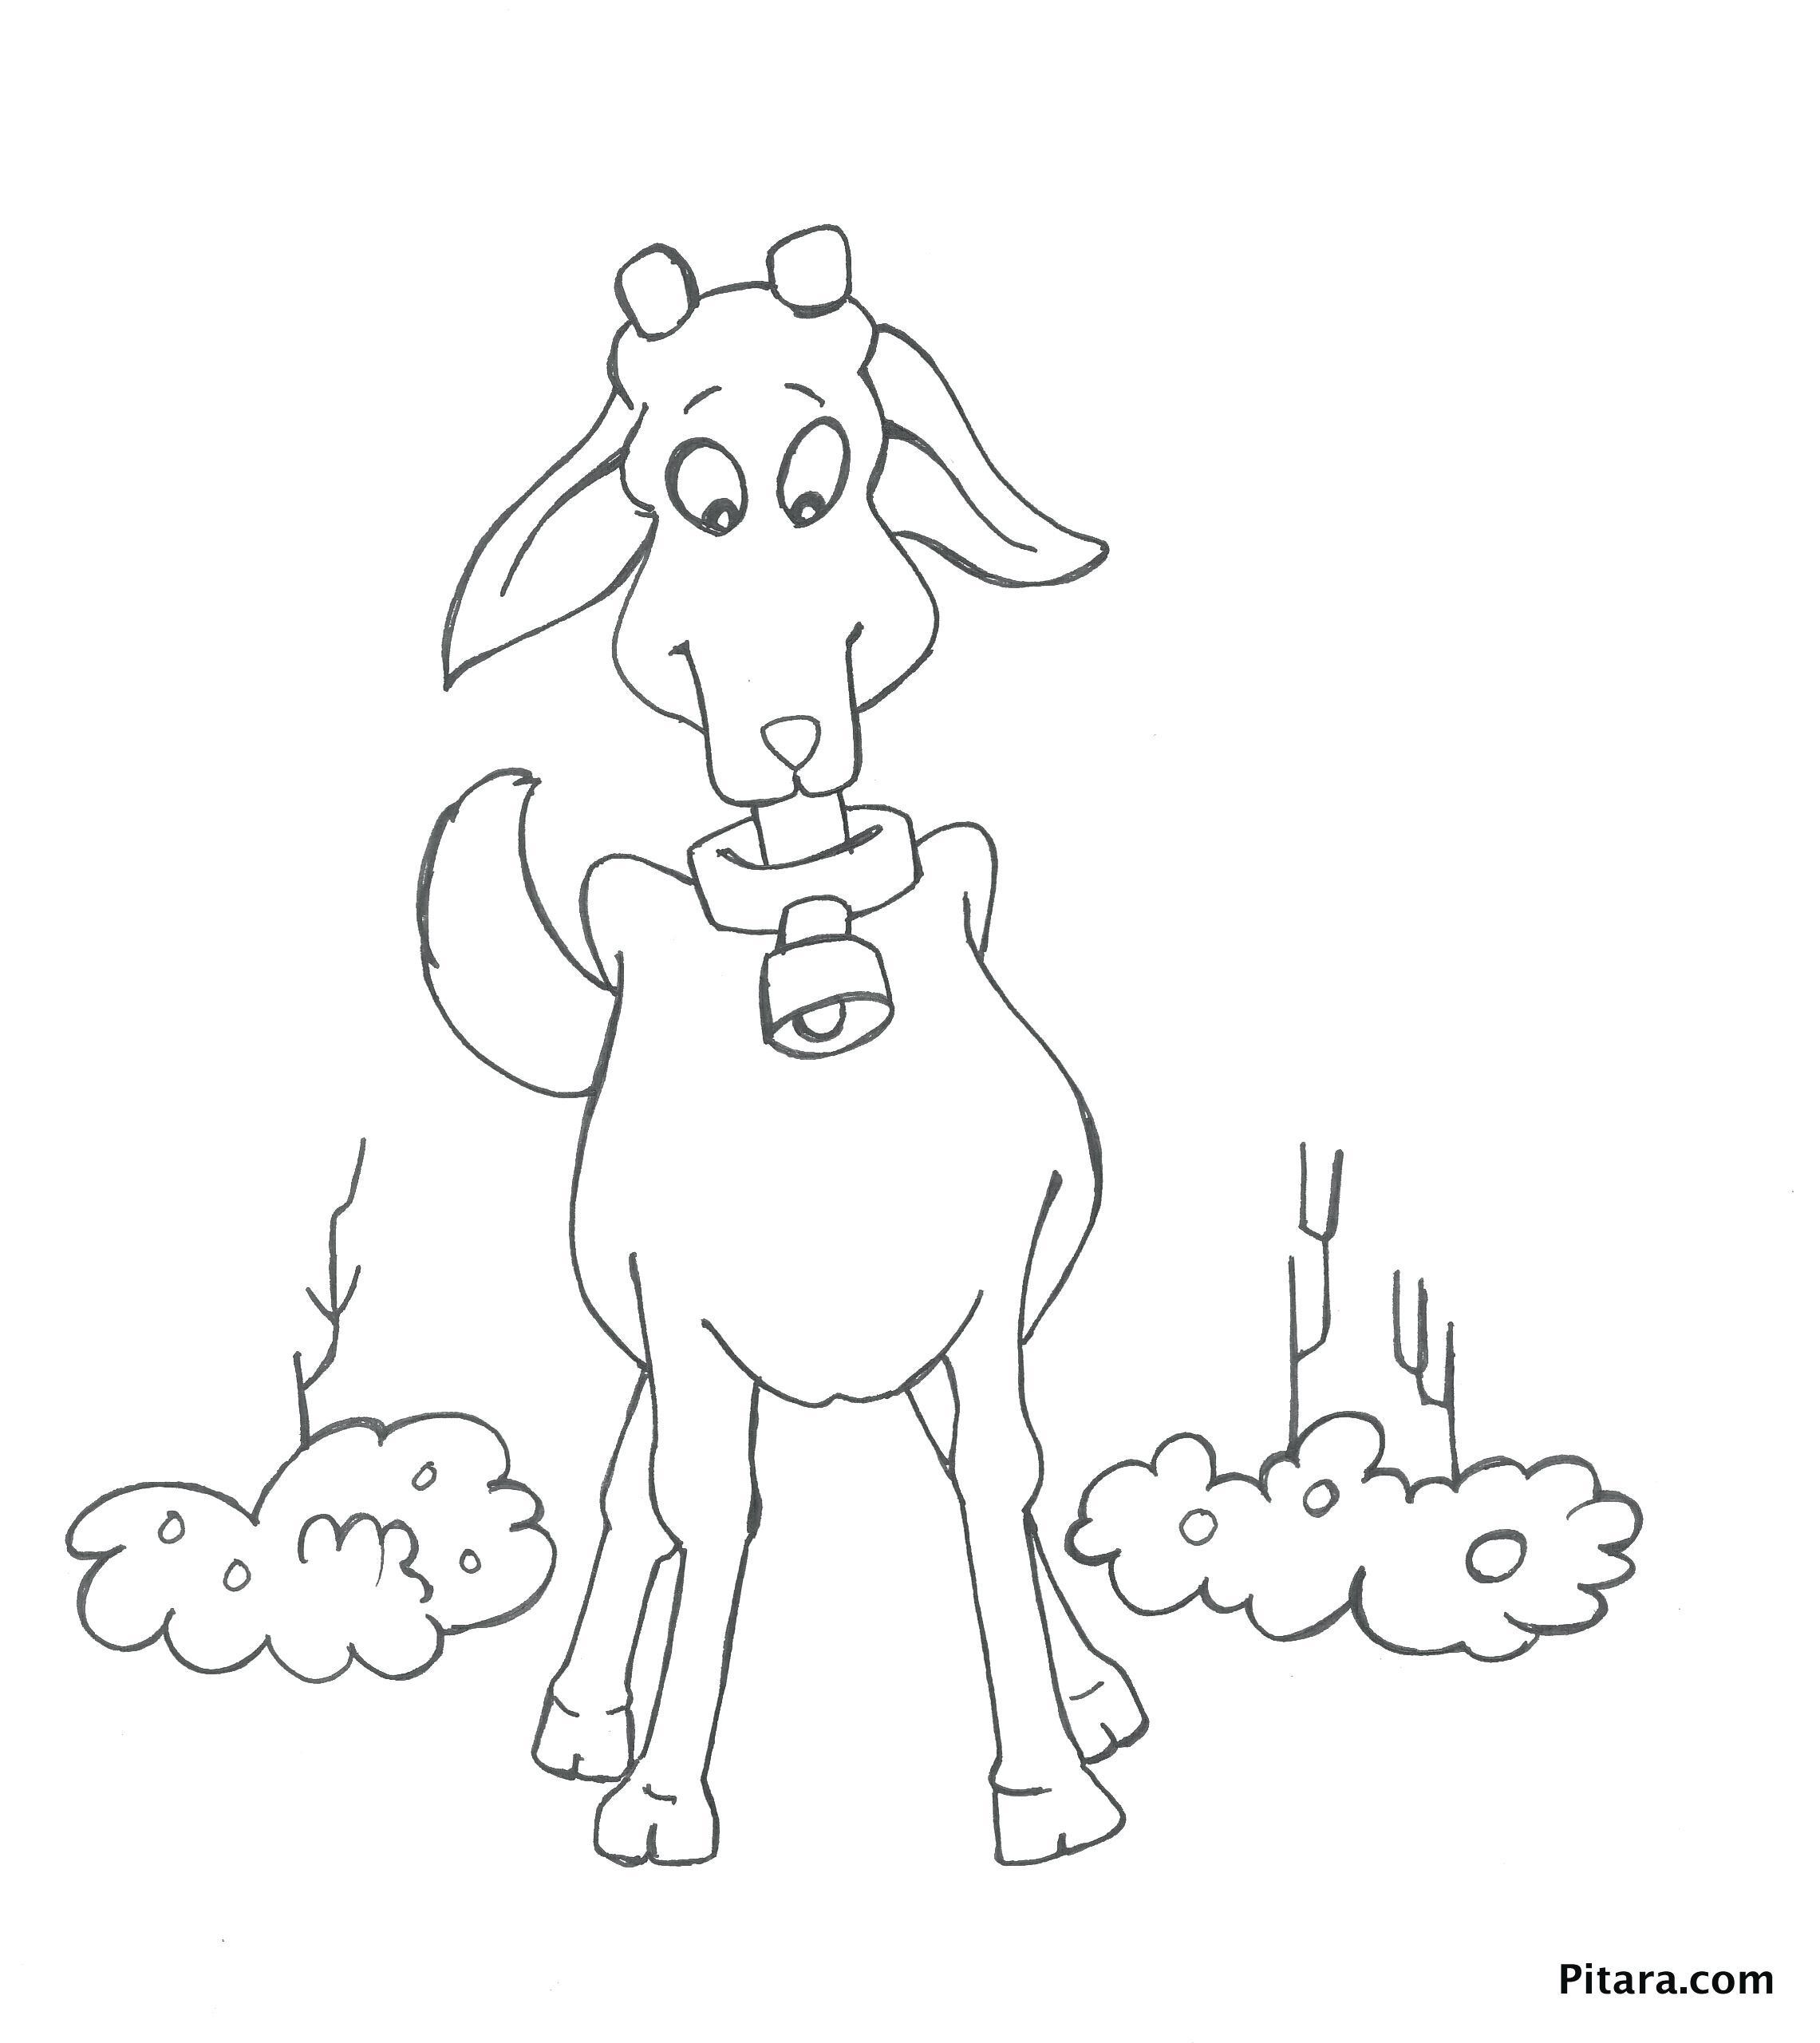 Coloring Pages Of Stuffed Animals Wallpaper